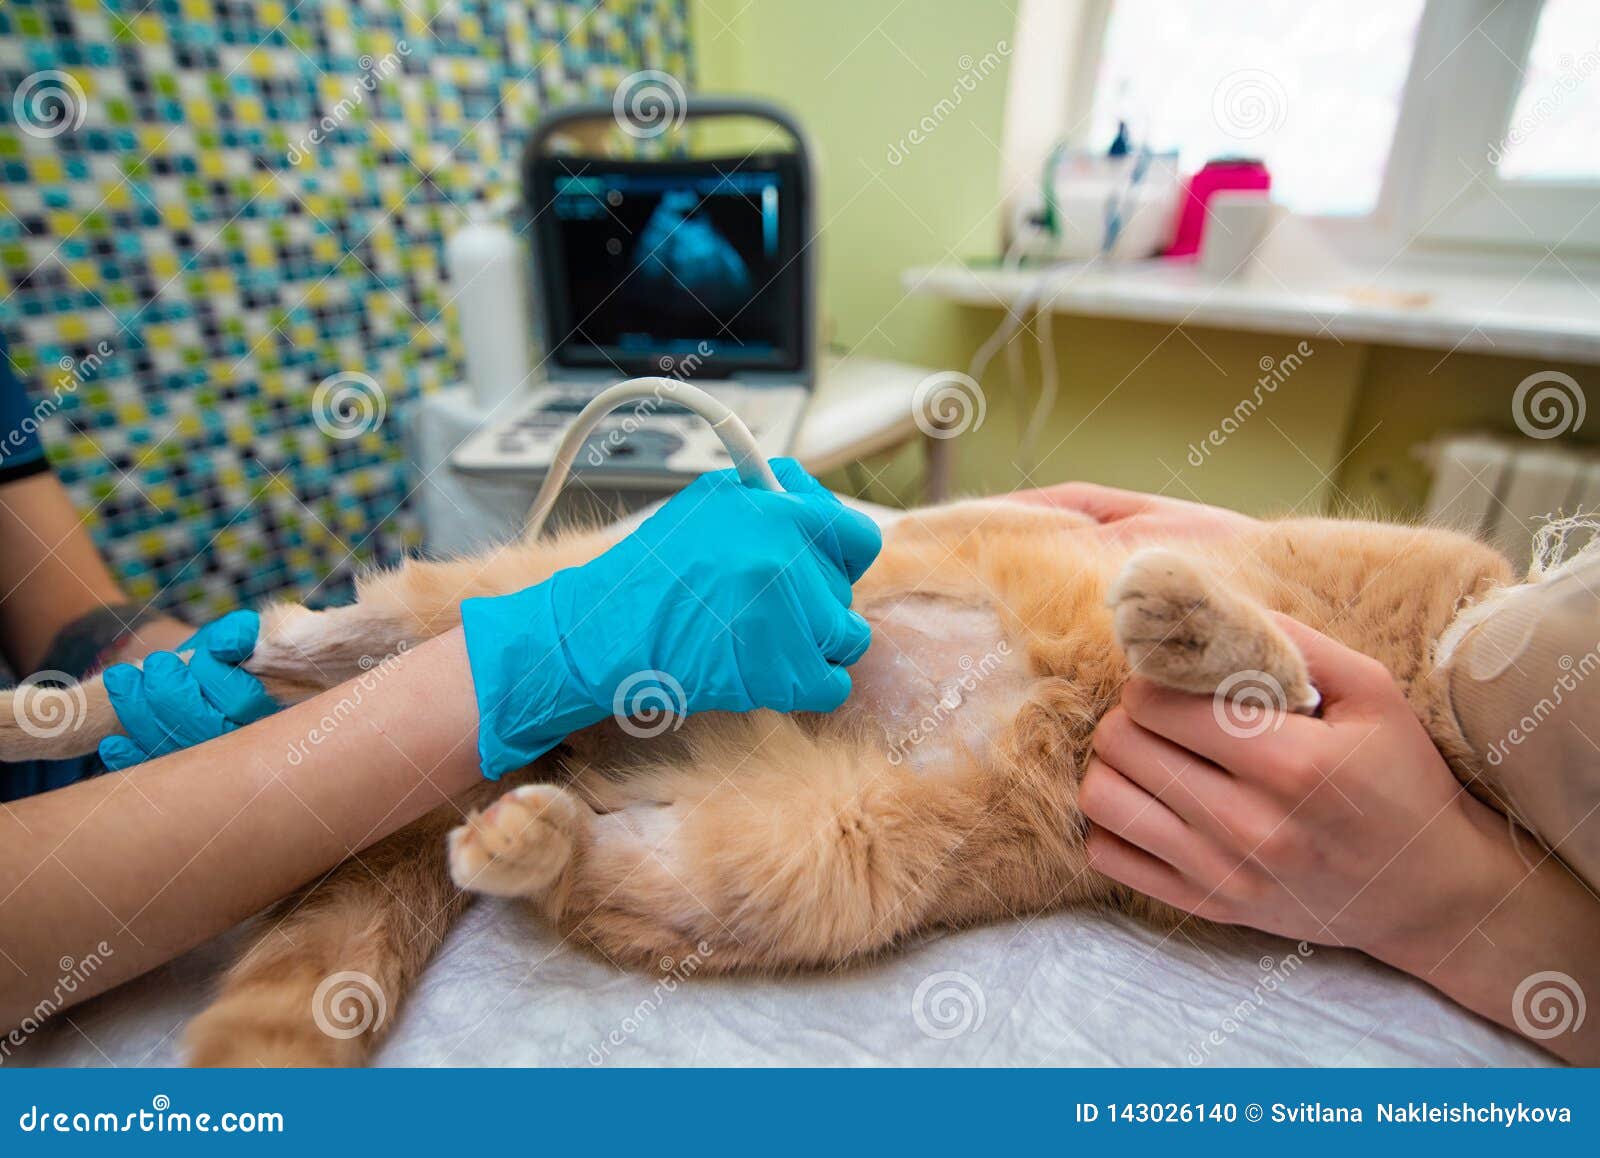 the doctor does an ultrasound examination of the cat`s abdomen